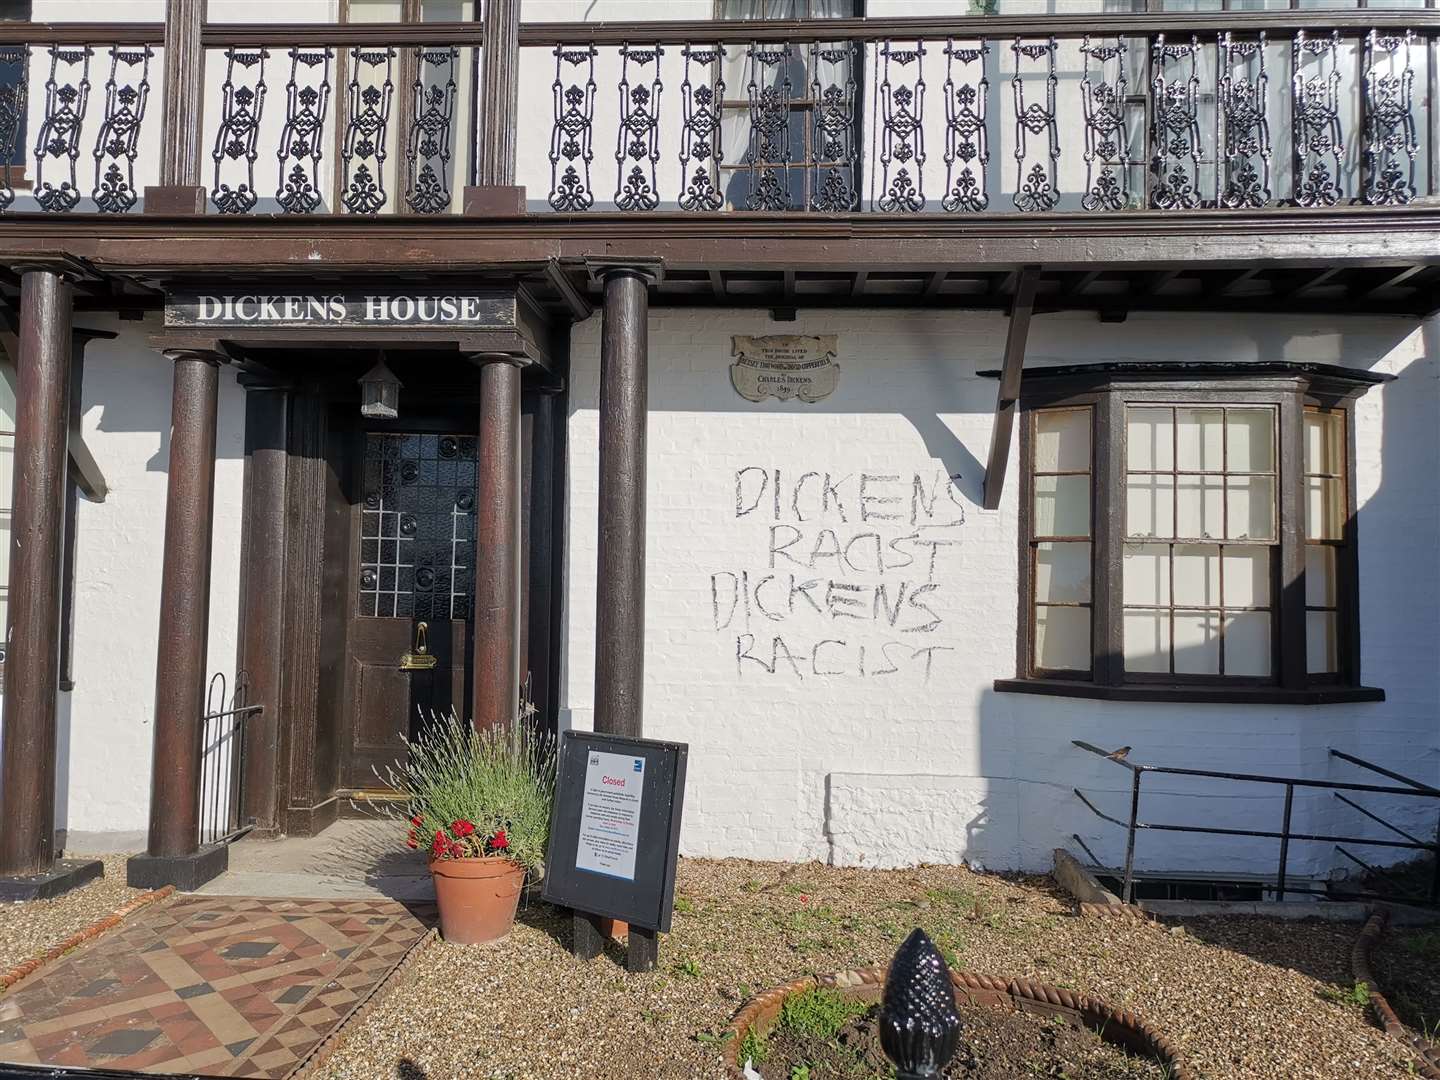 Graffiti was daubed over Dickens House claiming the author was racist